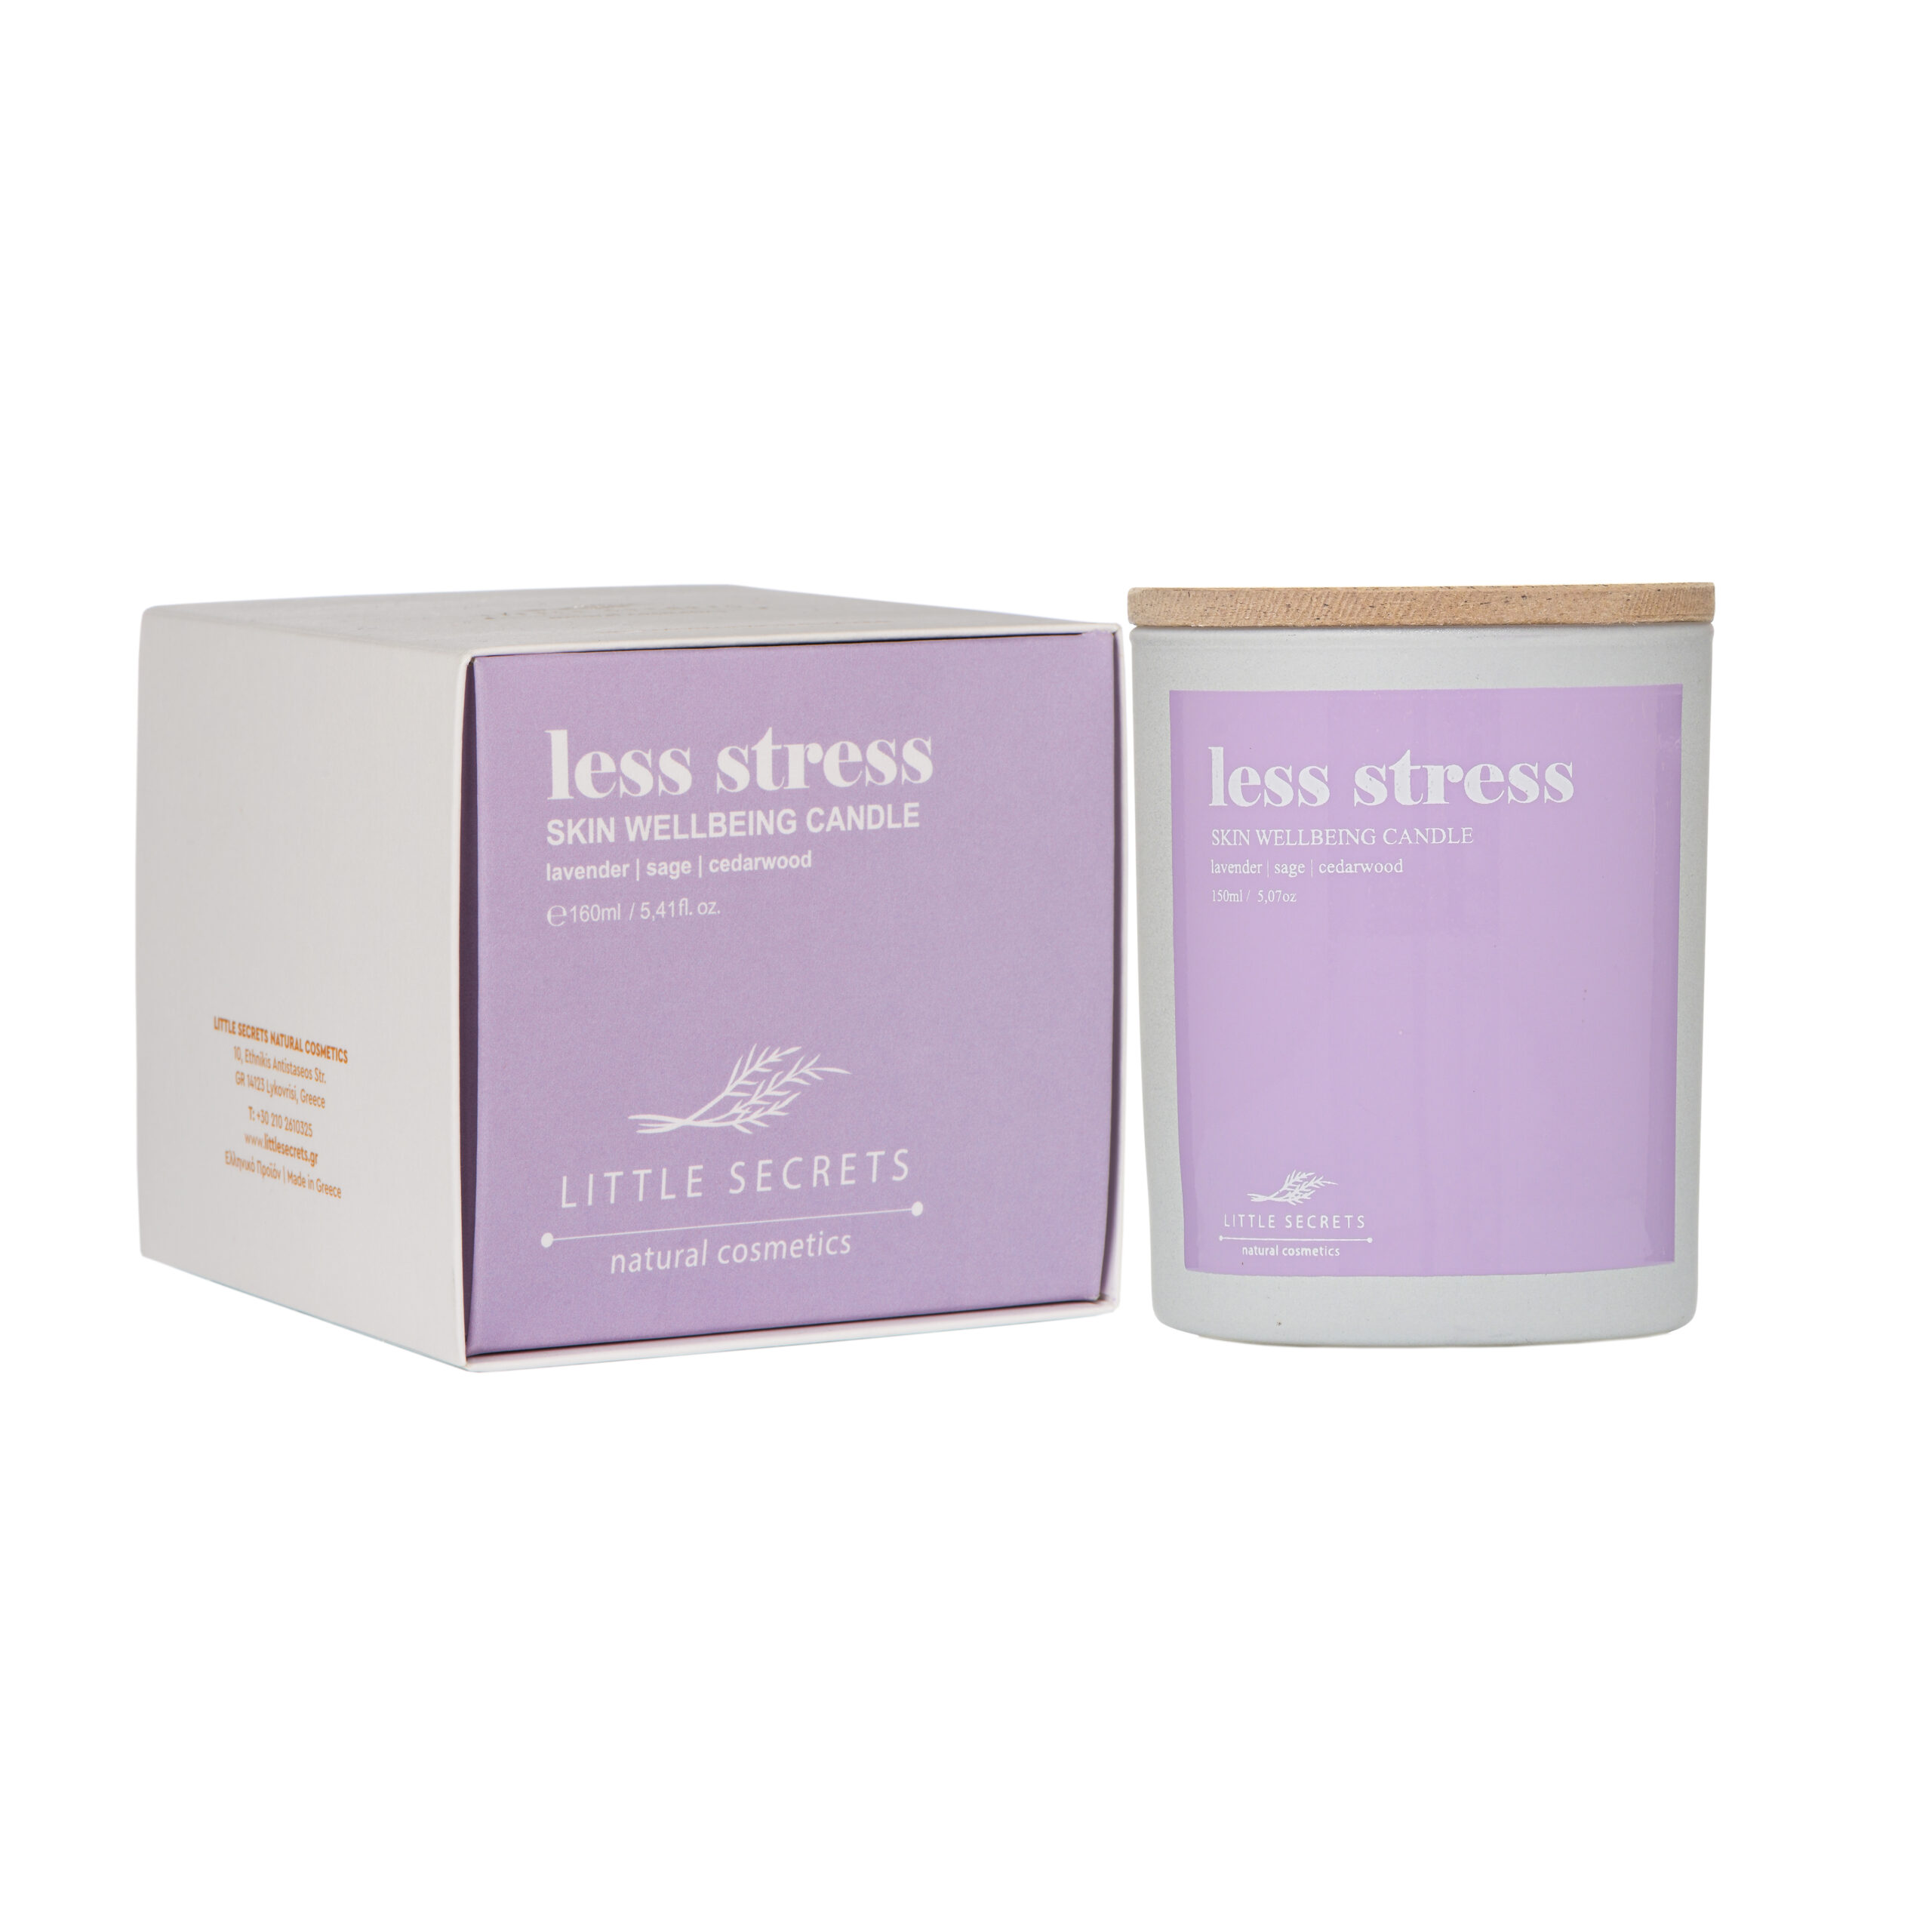 Less Stress Skin Wellbeing Candle